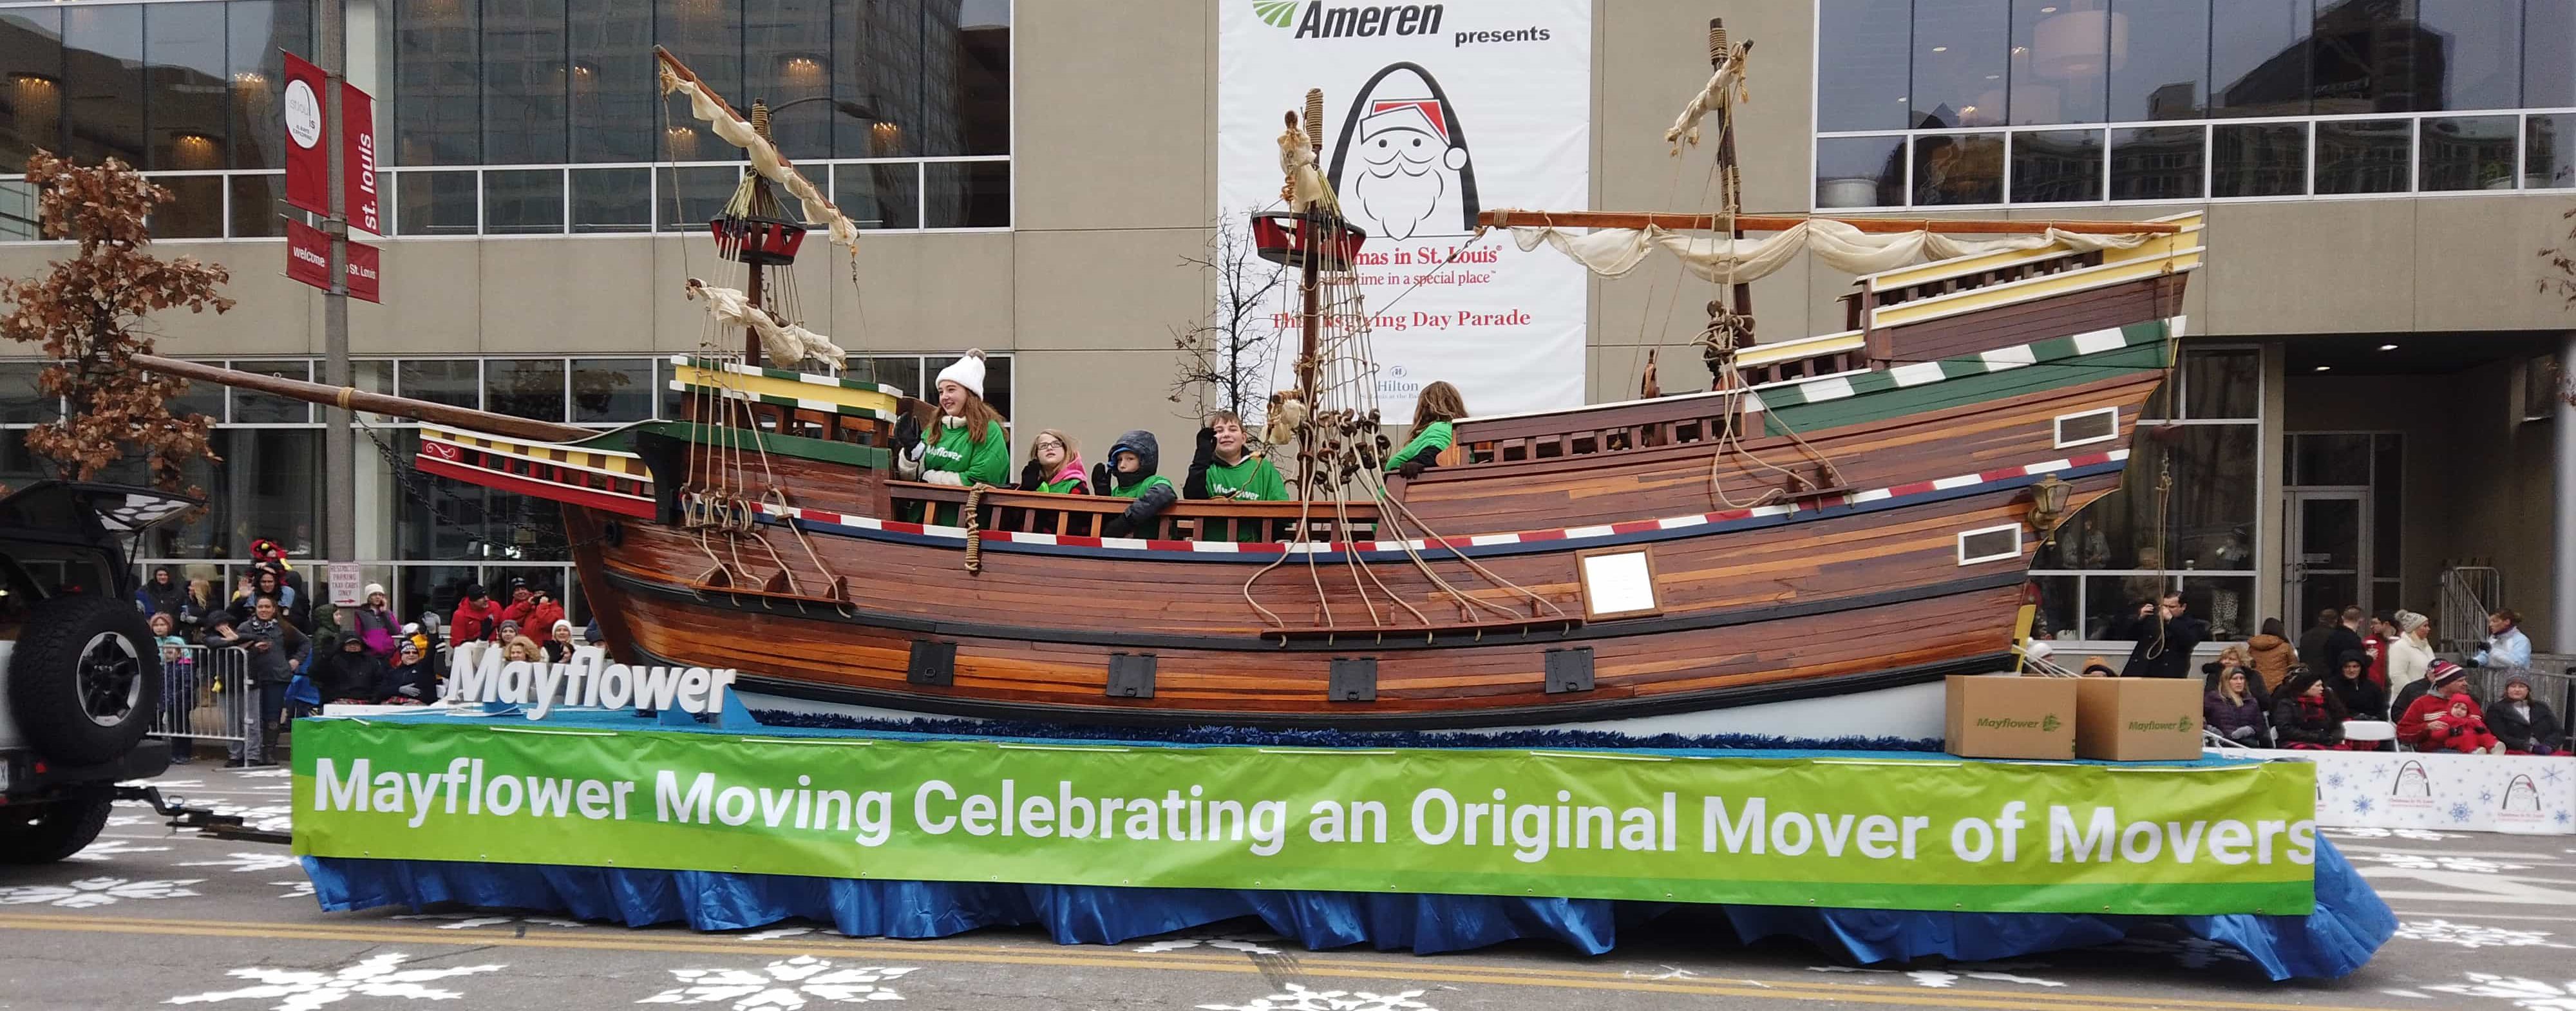 Mayflower Transit Celebrates The 400th Anniversary Of An Original Mover Of Movers Mayflower